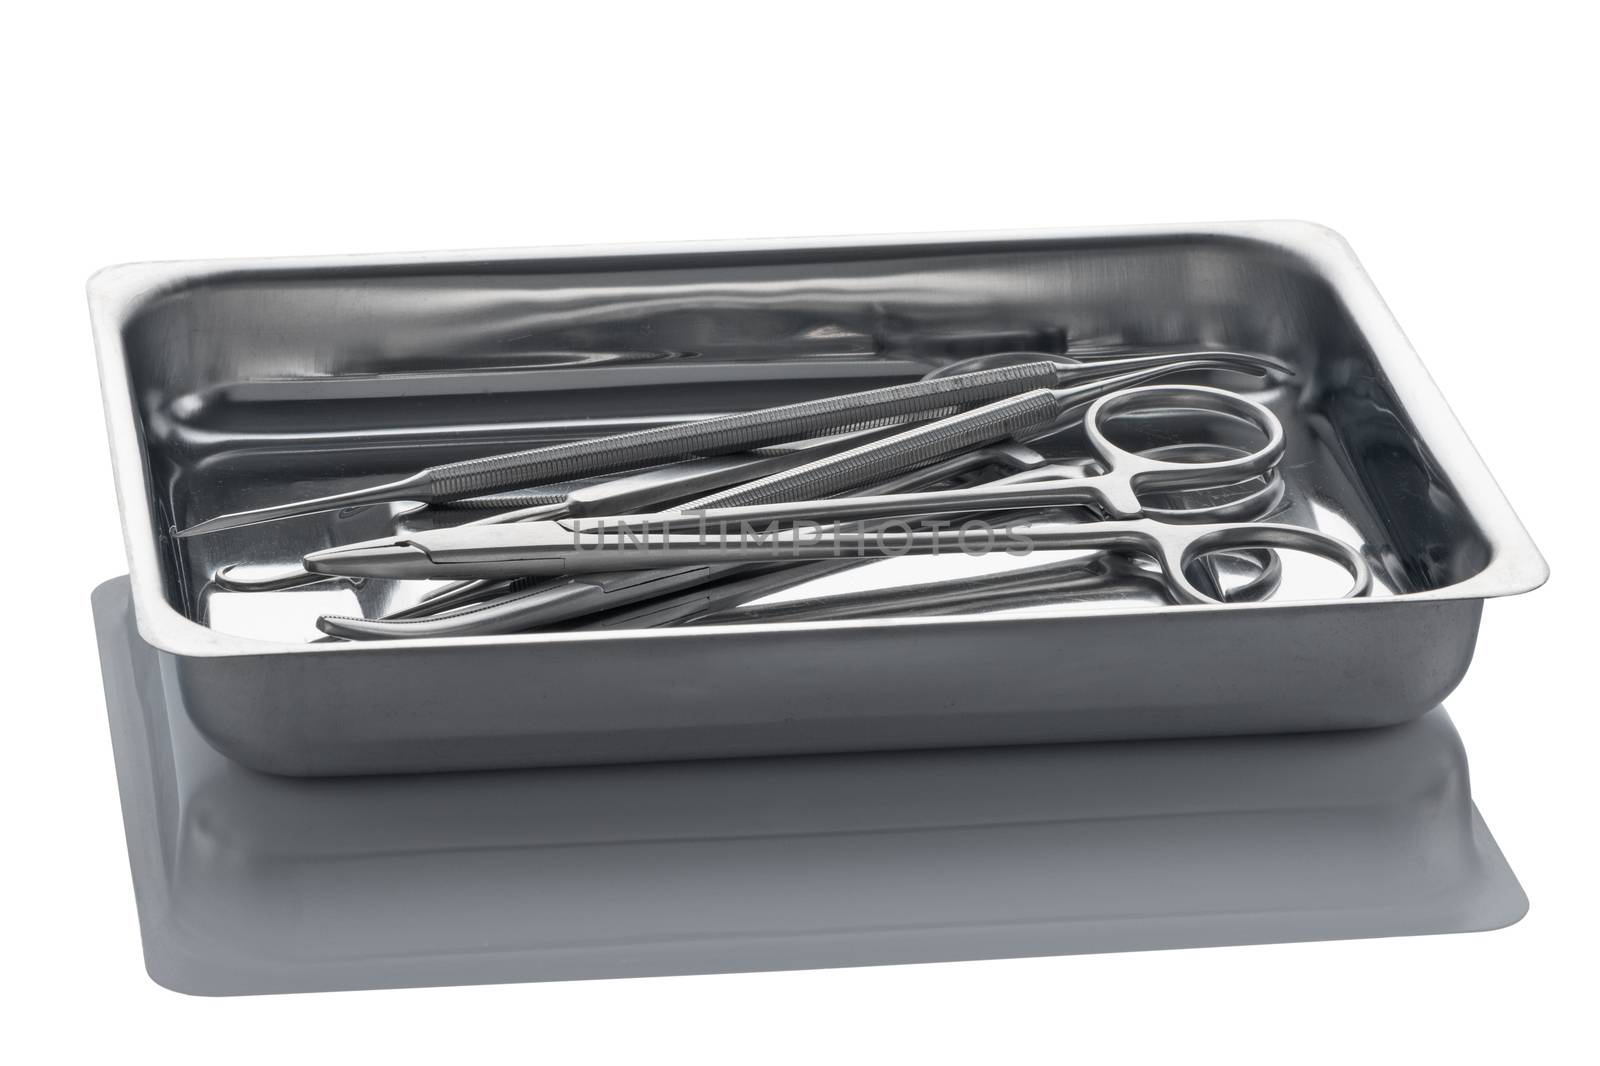 Tray with surgical tools from stainless steel isolated on a white background